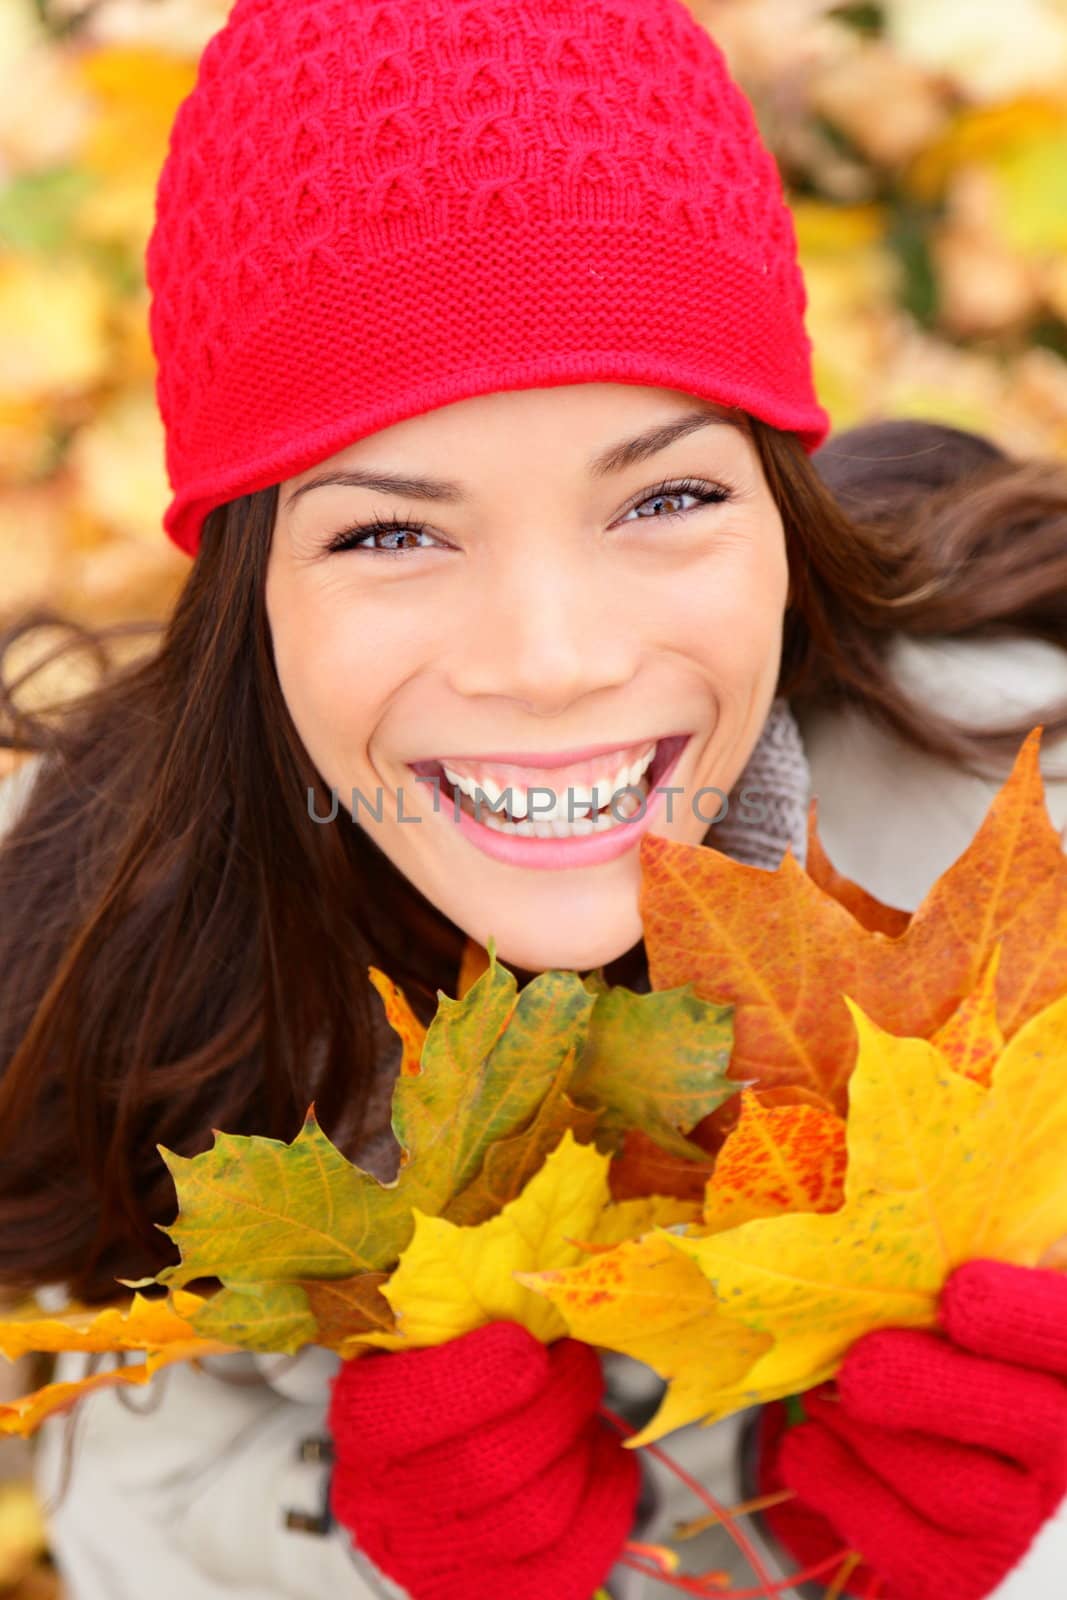 Autumn girl in fall colors smiling happy. Fall woman portrait of cheerful and beautiful mixed race Asian Caucasian young woman.